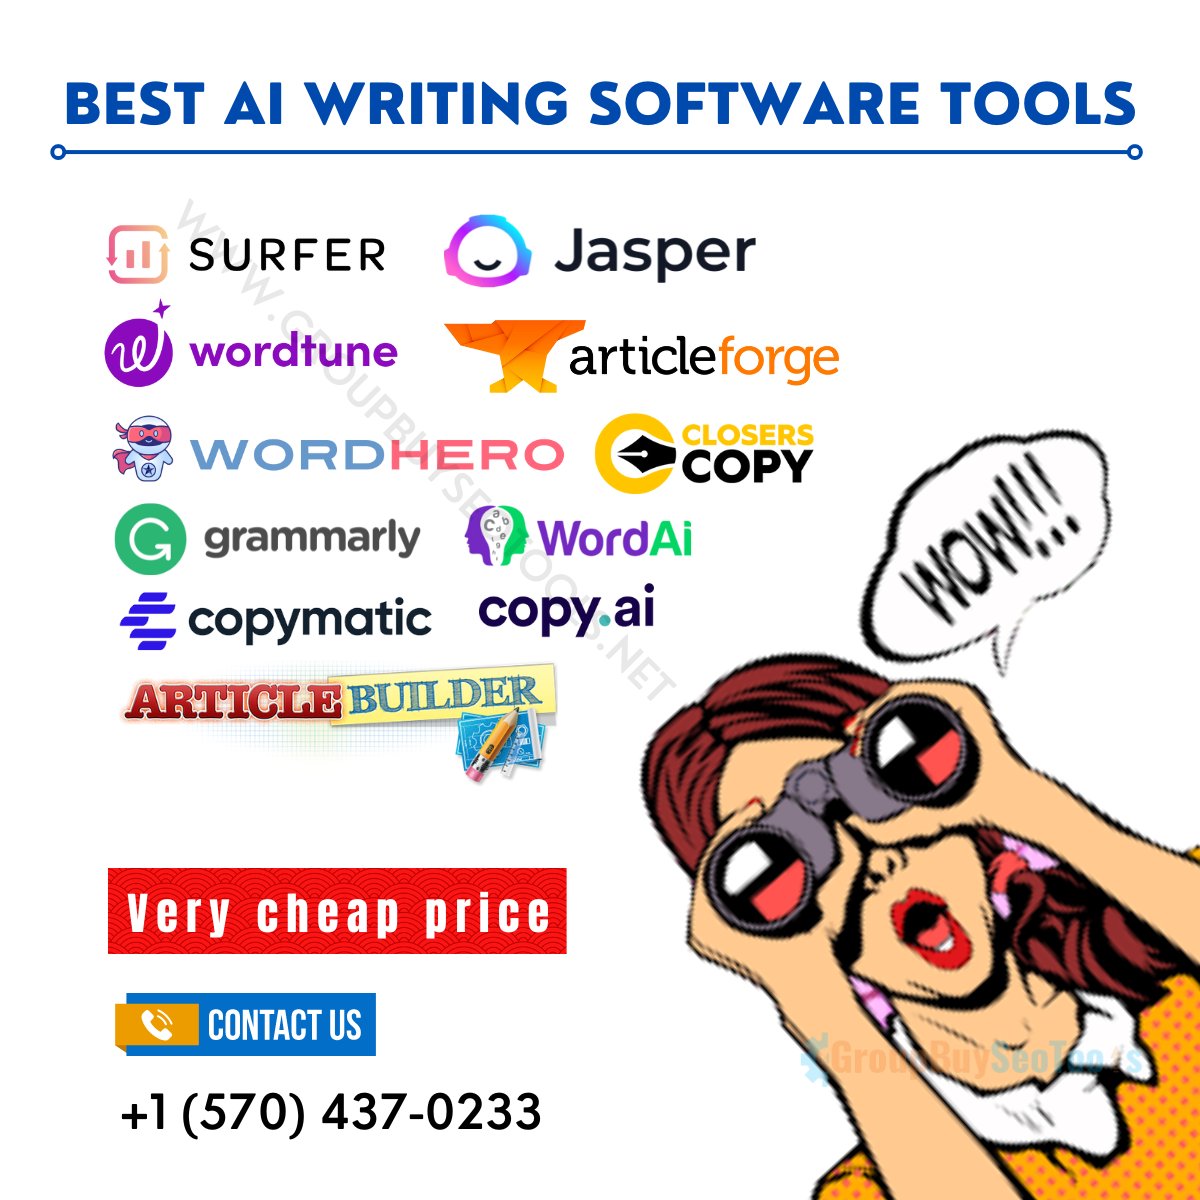 Best AI Writing Software Tools✍️✍️
👌👌Very cheap price

✅Grammarly
✅Closerscopy
✅ArticleForge
✅ArticleForge
✅Wordtune
✅Surfer Seo
✅Wordhero
✅Copymatic
✅Wordai

👉👉WhatsApp me for More details +1 (570) 437-0233

#writing #ai #software #seo #writingtools